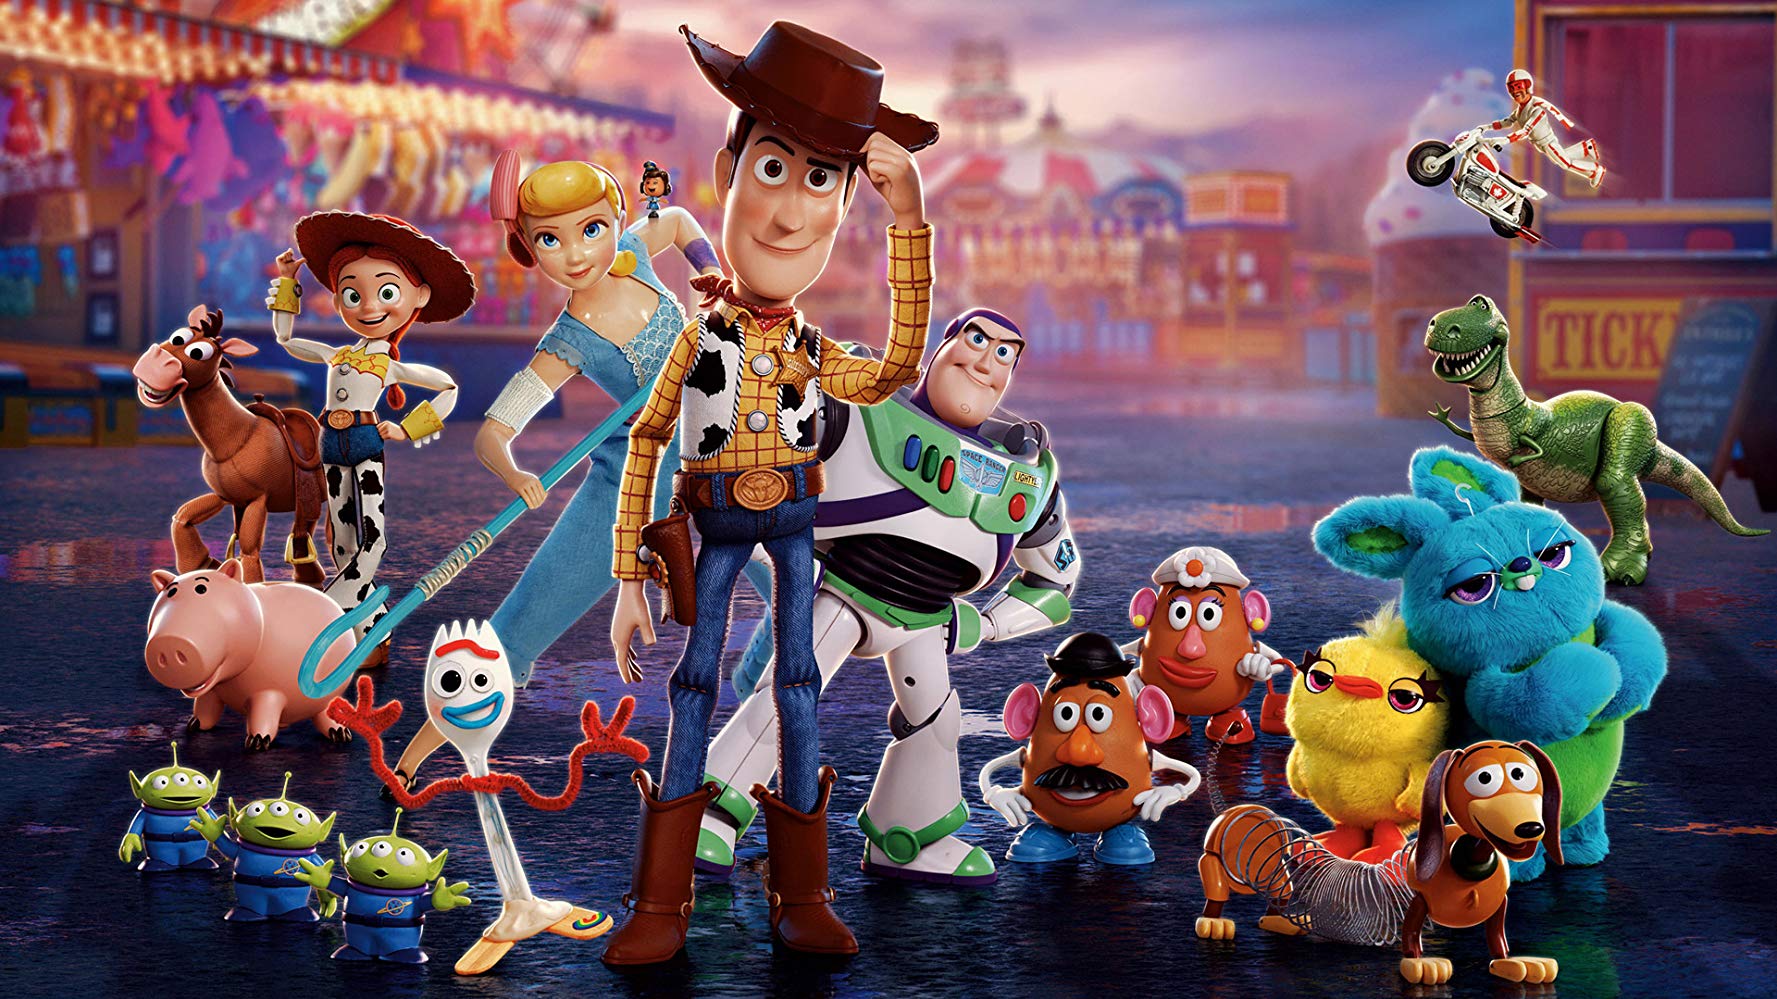 REVIEW: Toy Story 4